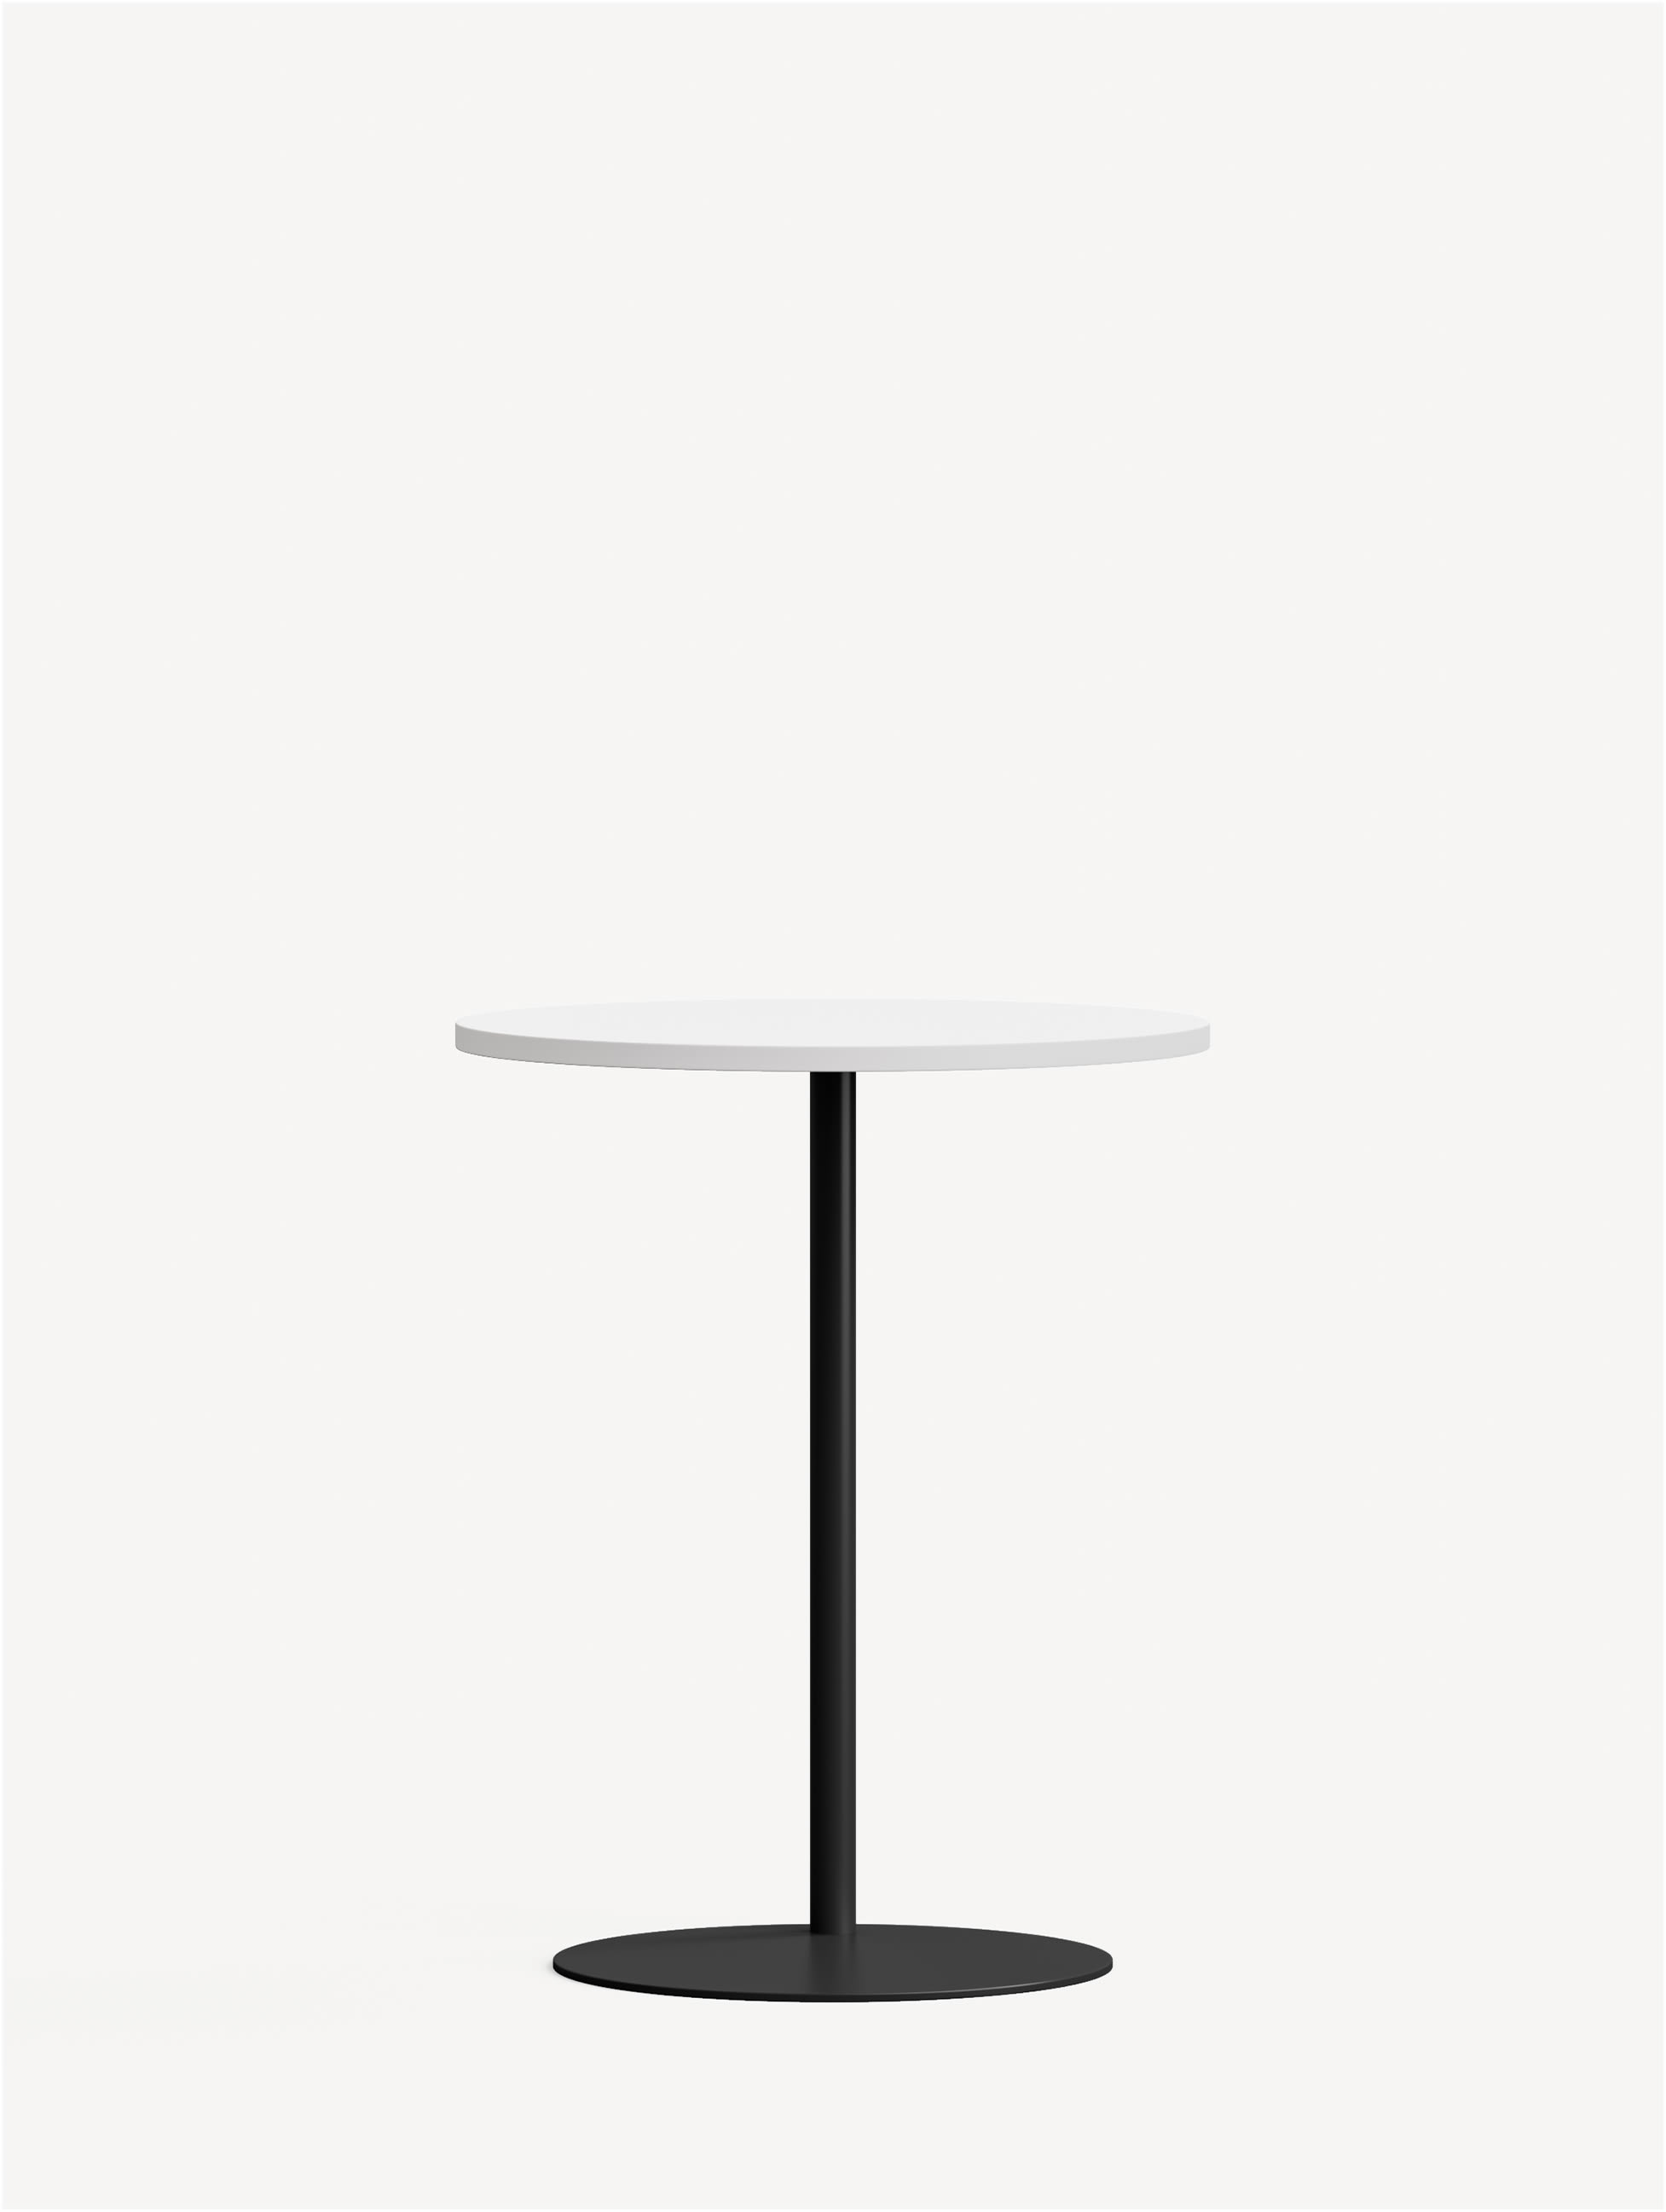 Front view of a Rise occasional table with a black, round pedestal base and white round table top.